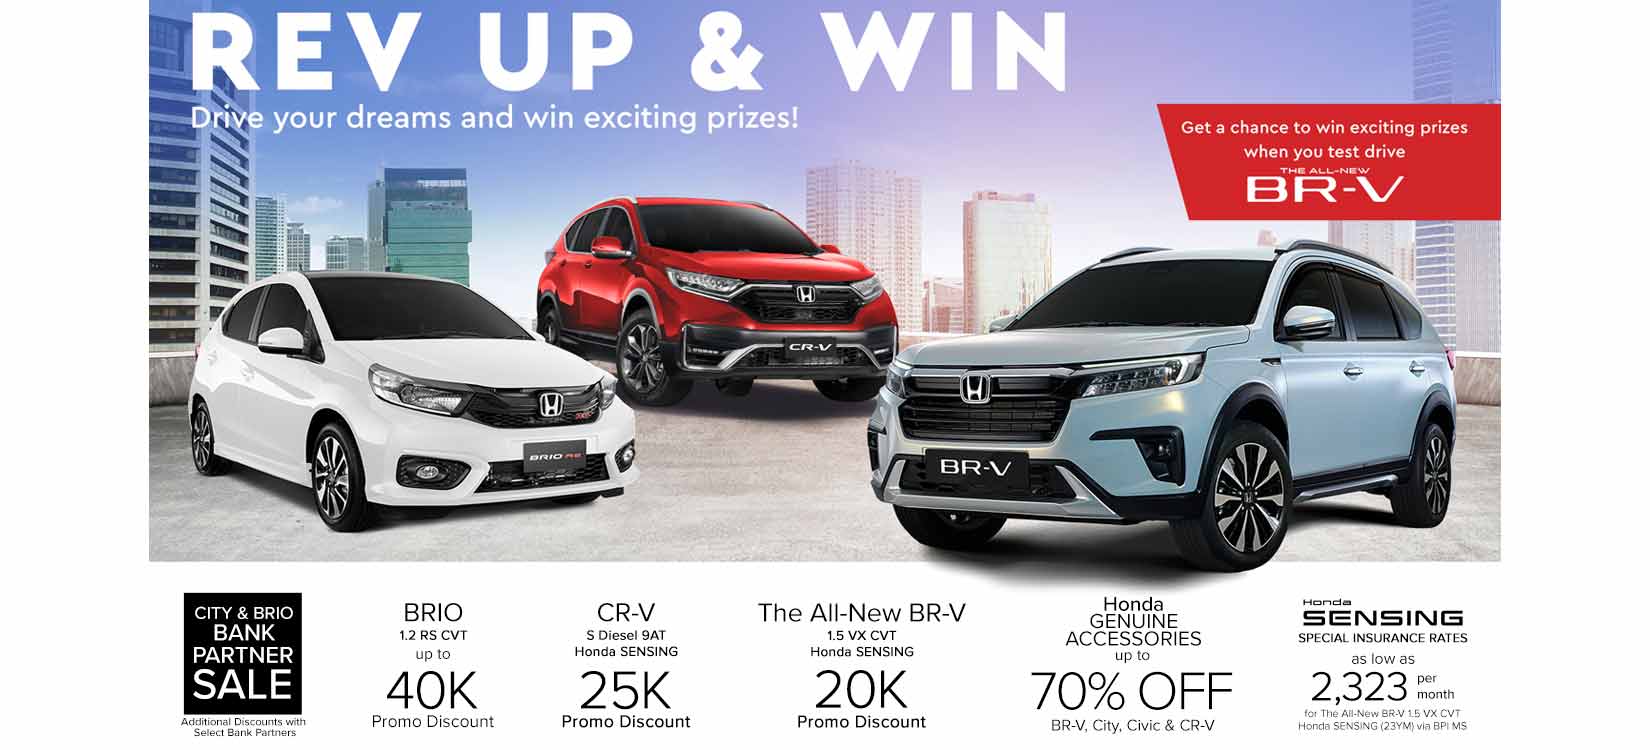 Sweet deals and exclusive offers await Honda customers in “Rev Up and Win” promo